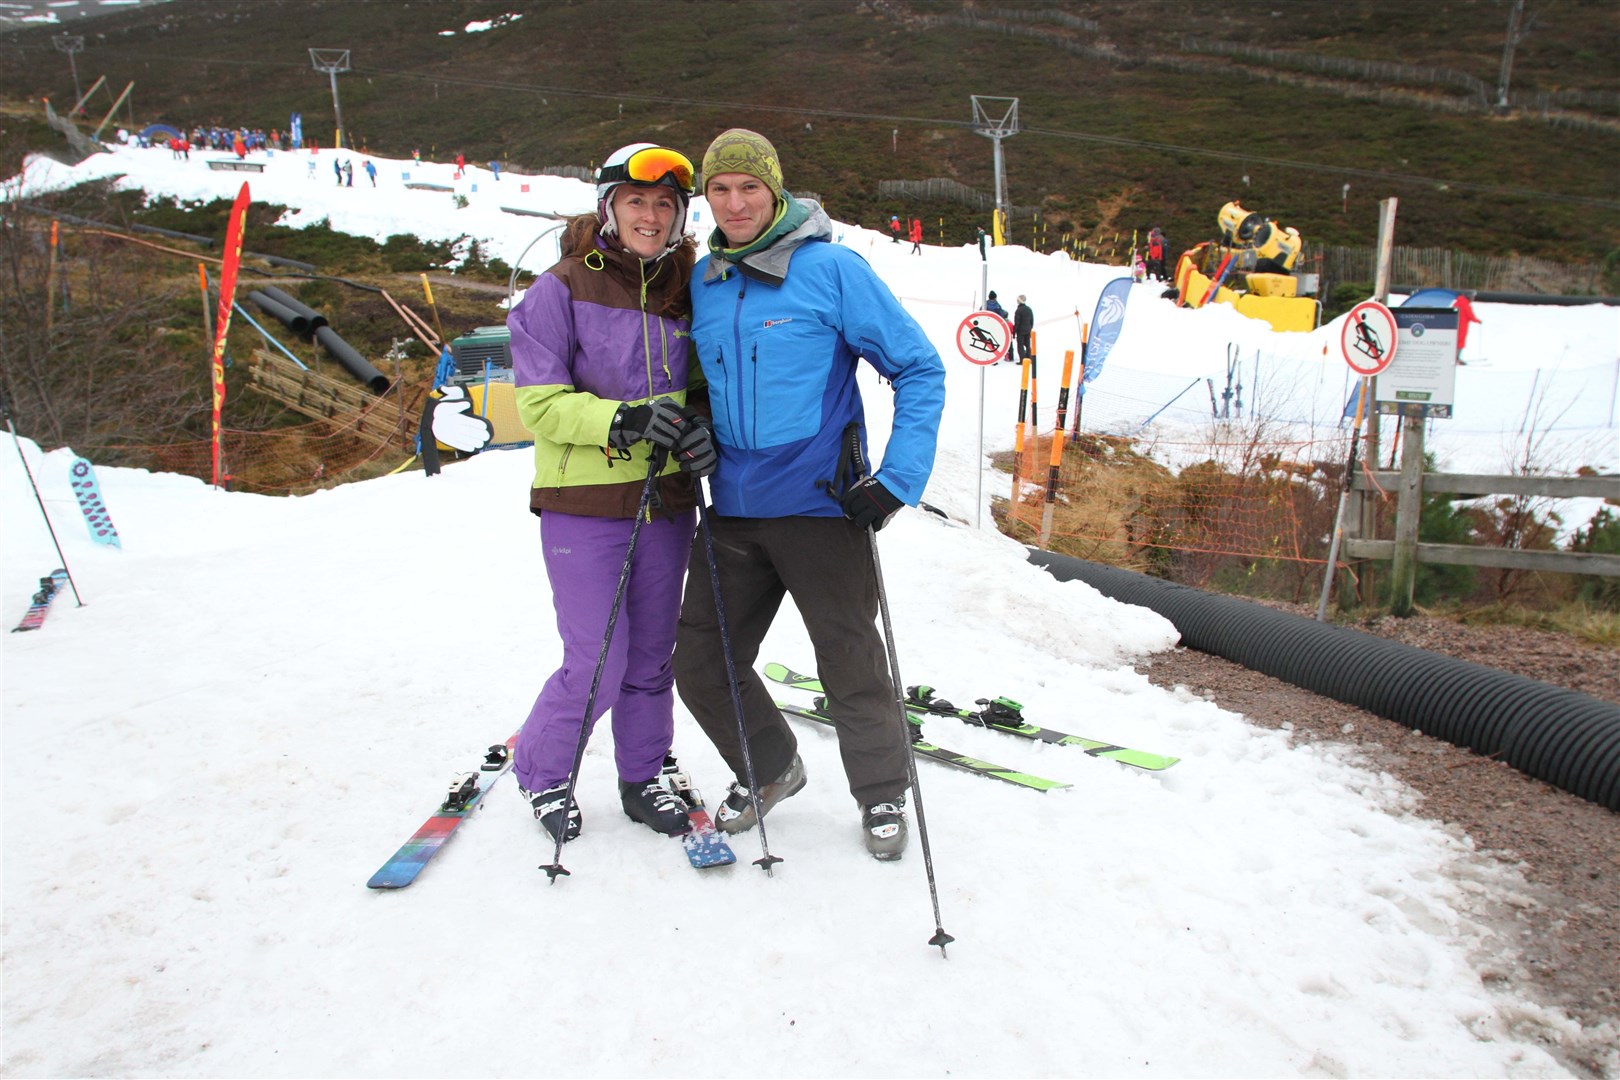 Helen and Simon Coker, from Boat of Garten, on the opening day of the new ski season on Saturday. Ski bosses want to re-profile the lower slopes partly pictured in the background.